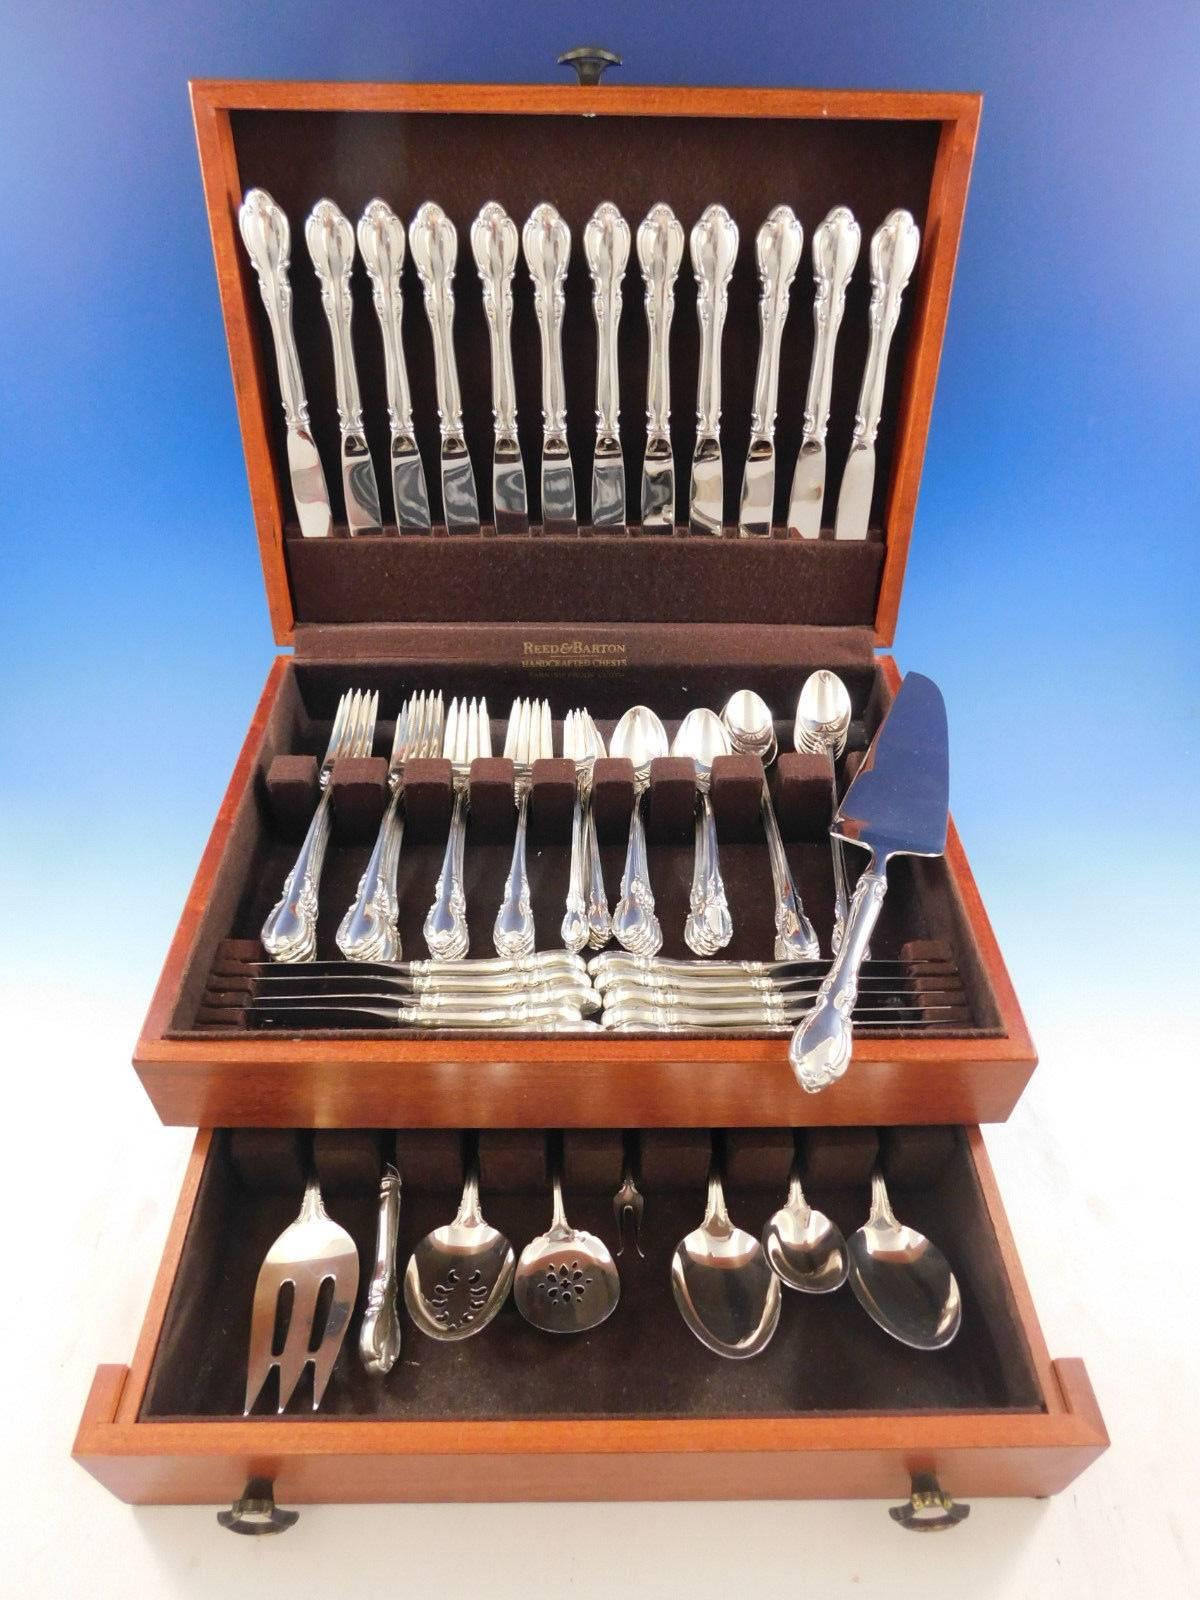 Legato by Towle sterling silver Flatware set, 93 pieces. This set includes: 

12 Knives, modern, 9